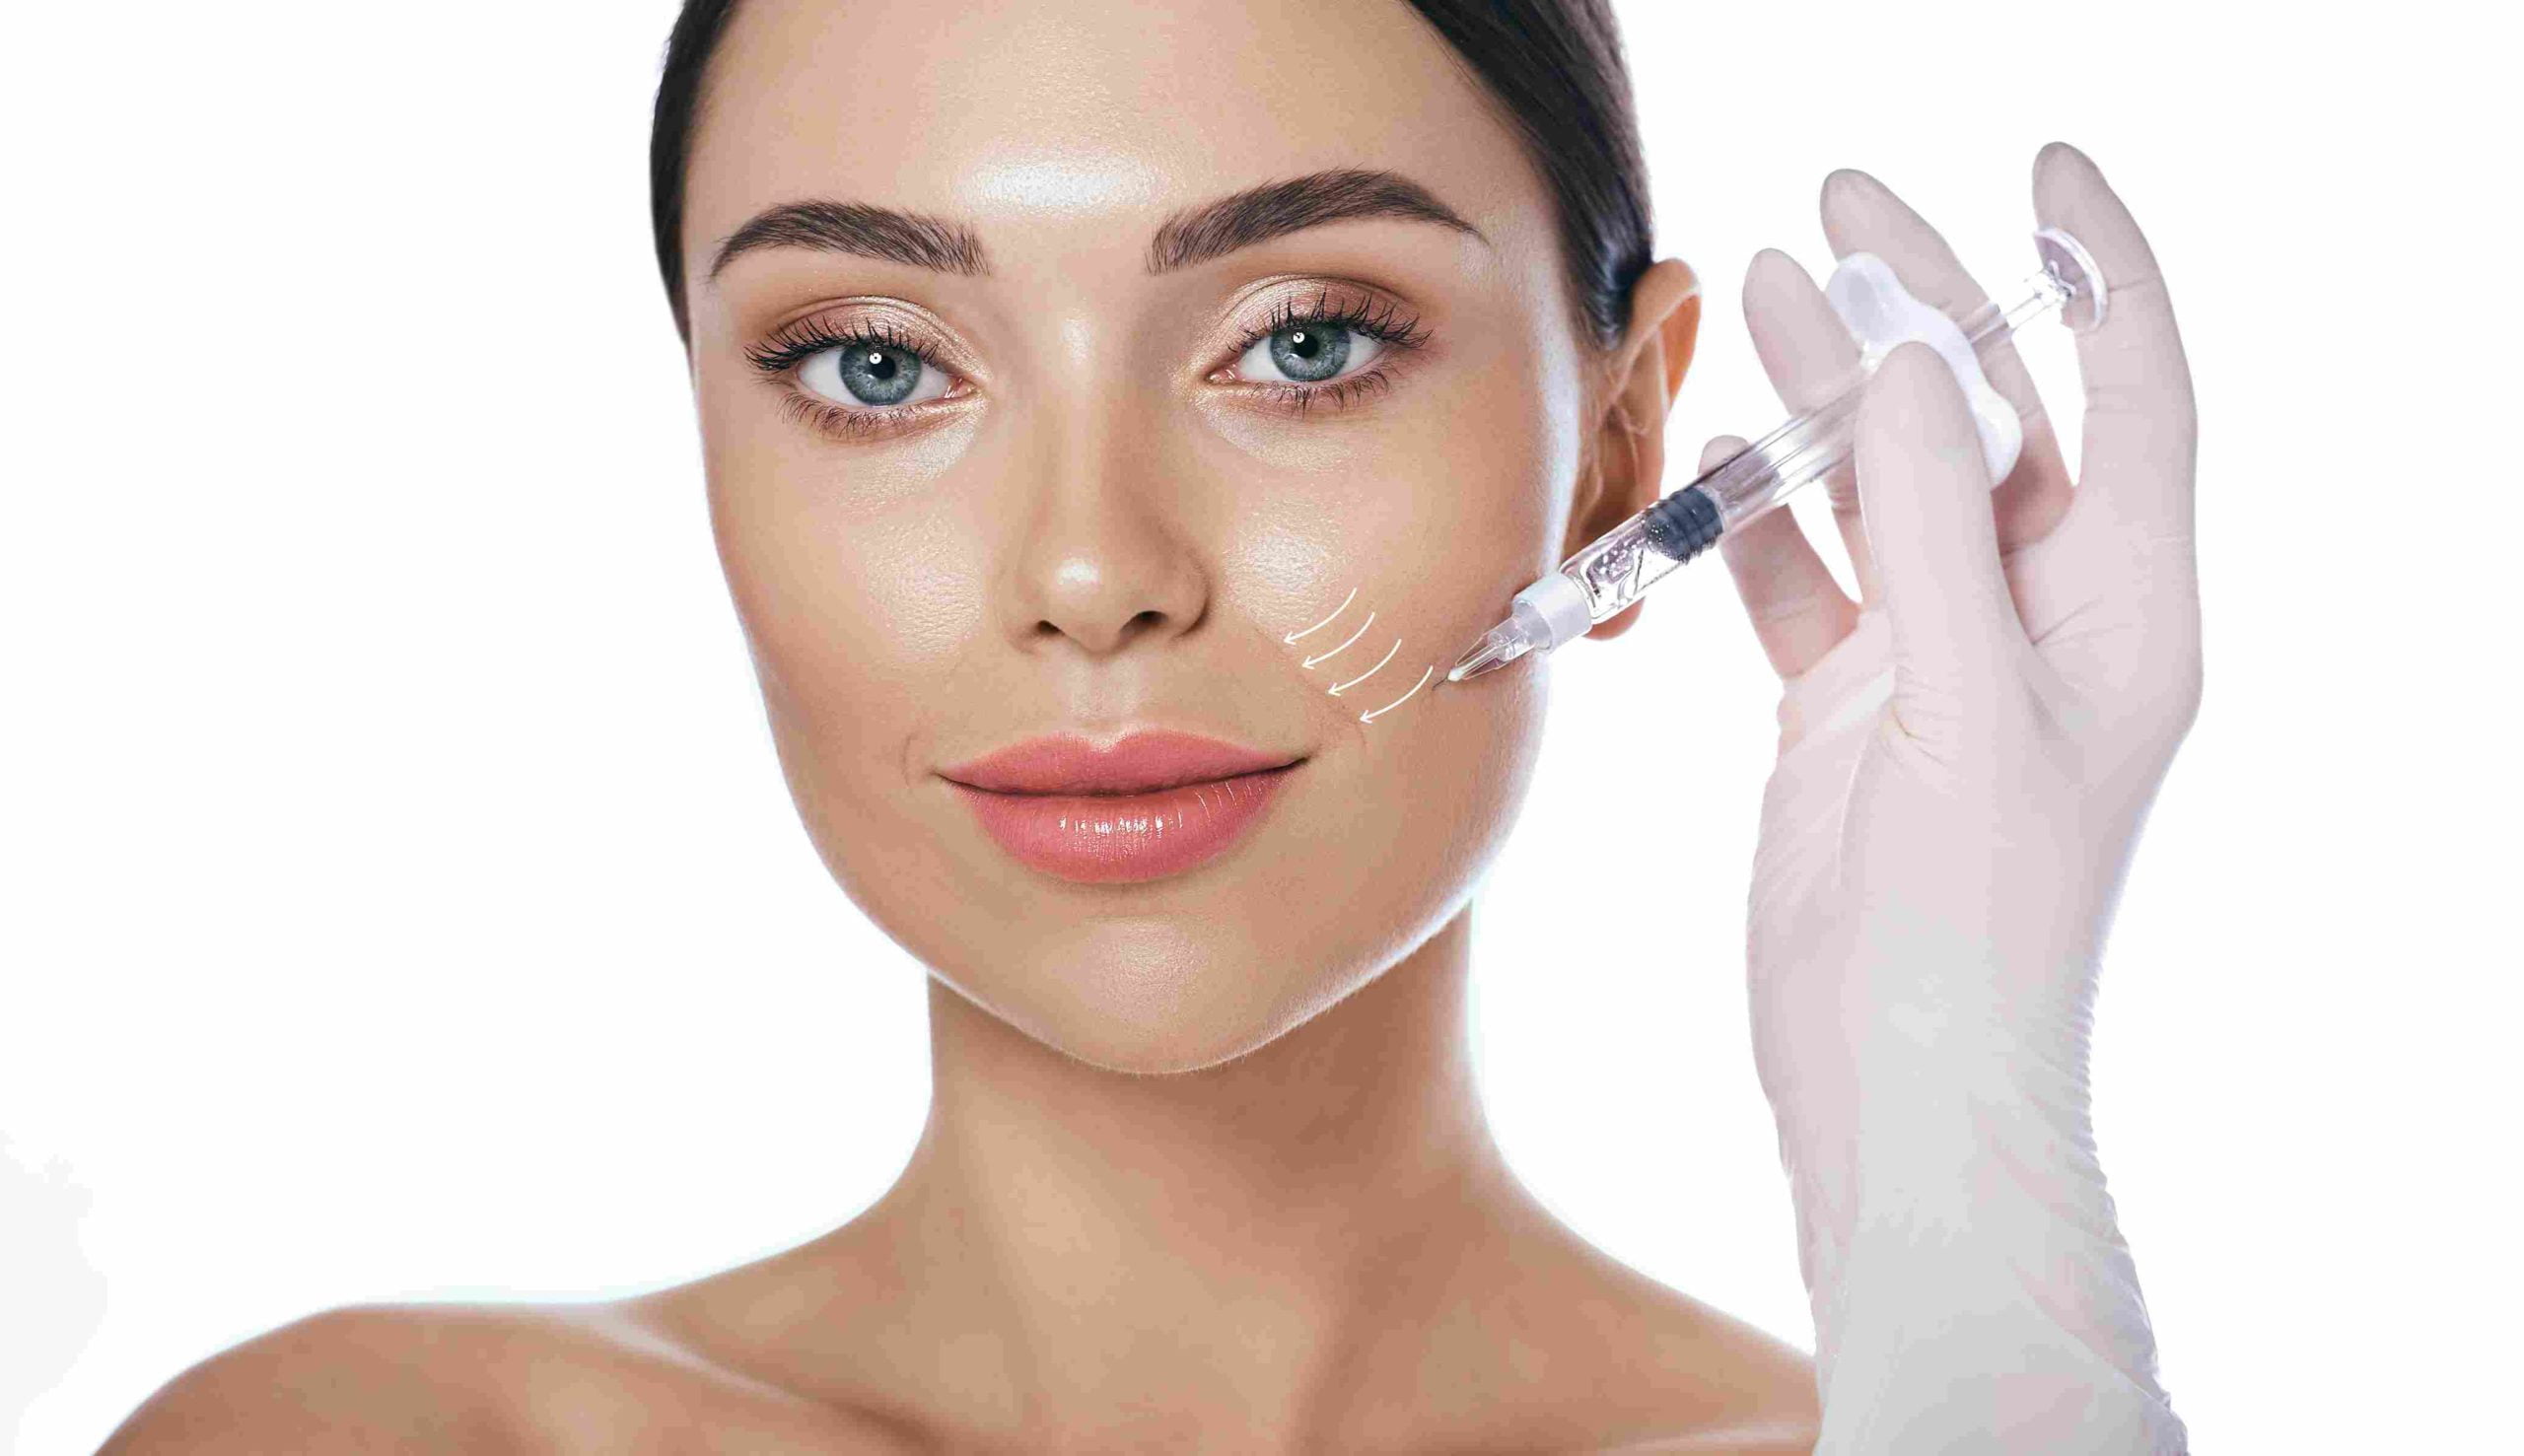 Clear Skin Woman's Face With Lifting Lines On Skin | Avail Aesthetics in Cary, NC